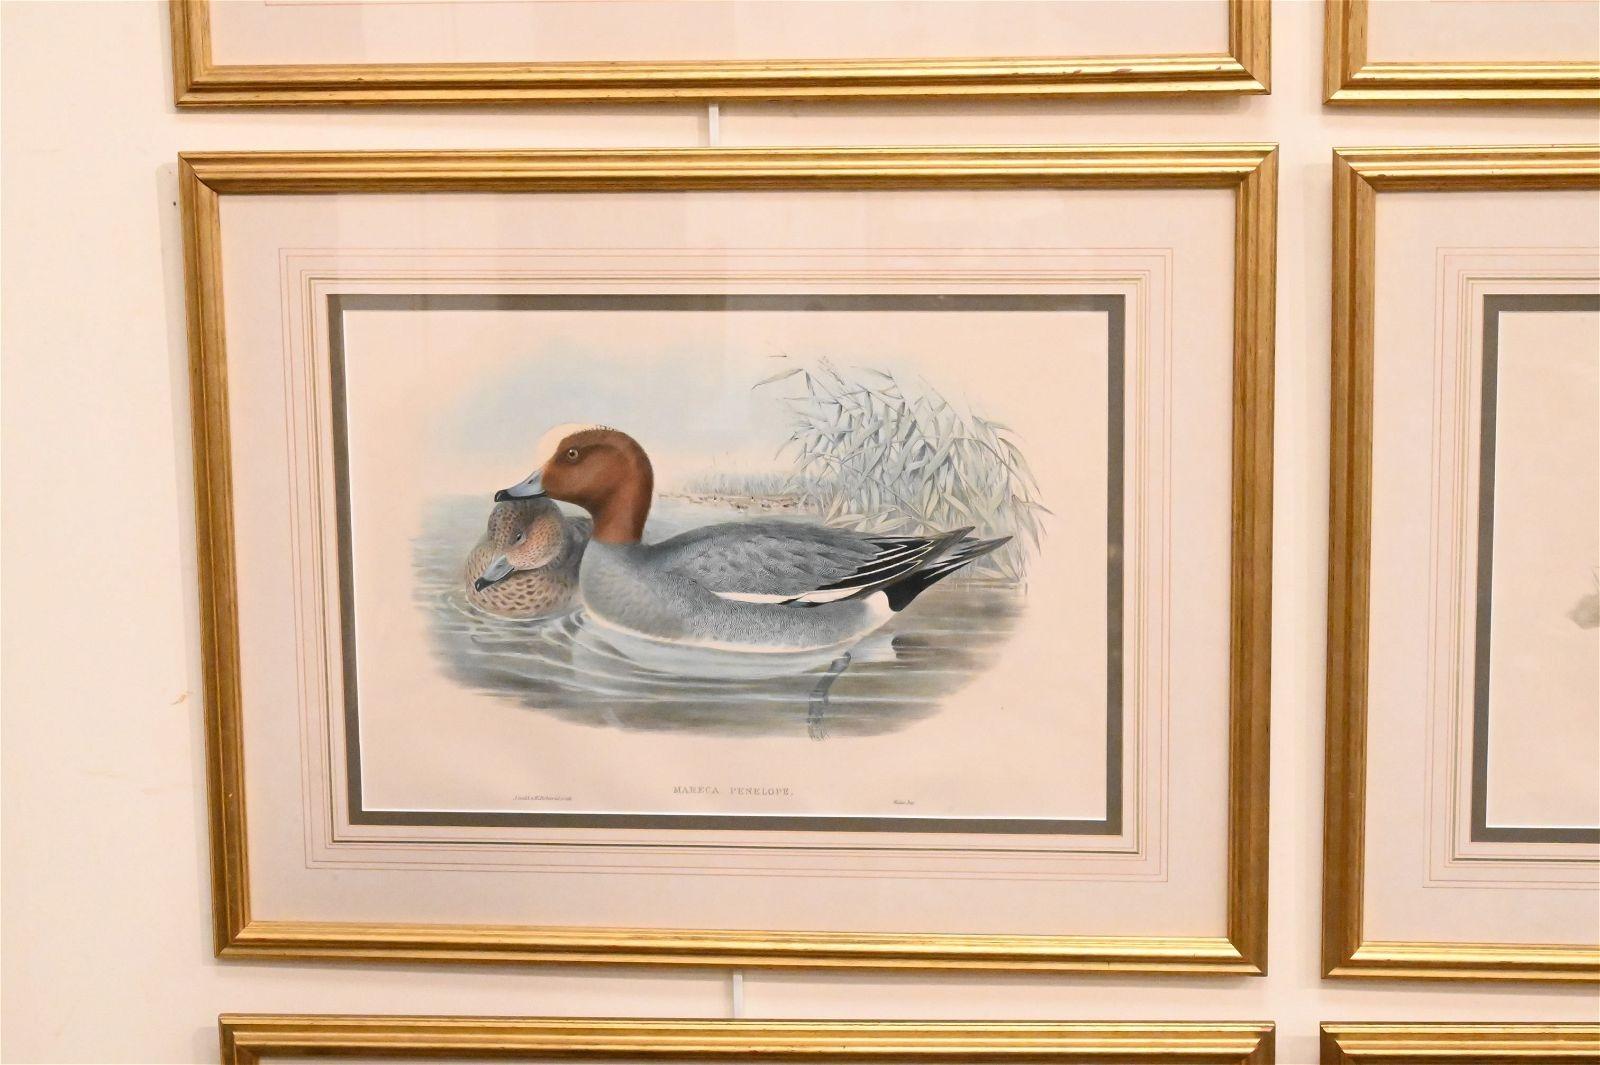 Gold framed and matted prints of 6 types of waterfowl with Latin Nomenclature. 
Includes: Colymbus Septentrionalis (Red-Throated Loon), Anser Ferus (Greylag Goose), Nyroca Leucophthalmos (Ferrogenious Duck), Mareca Penelope (Eurasian wigeon), Anser